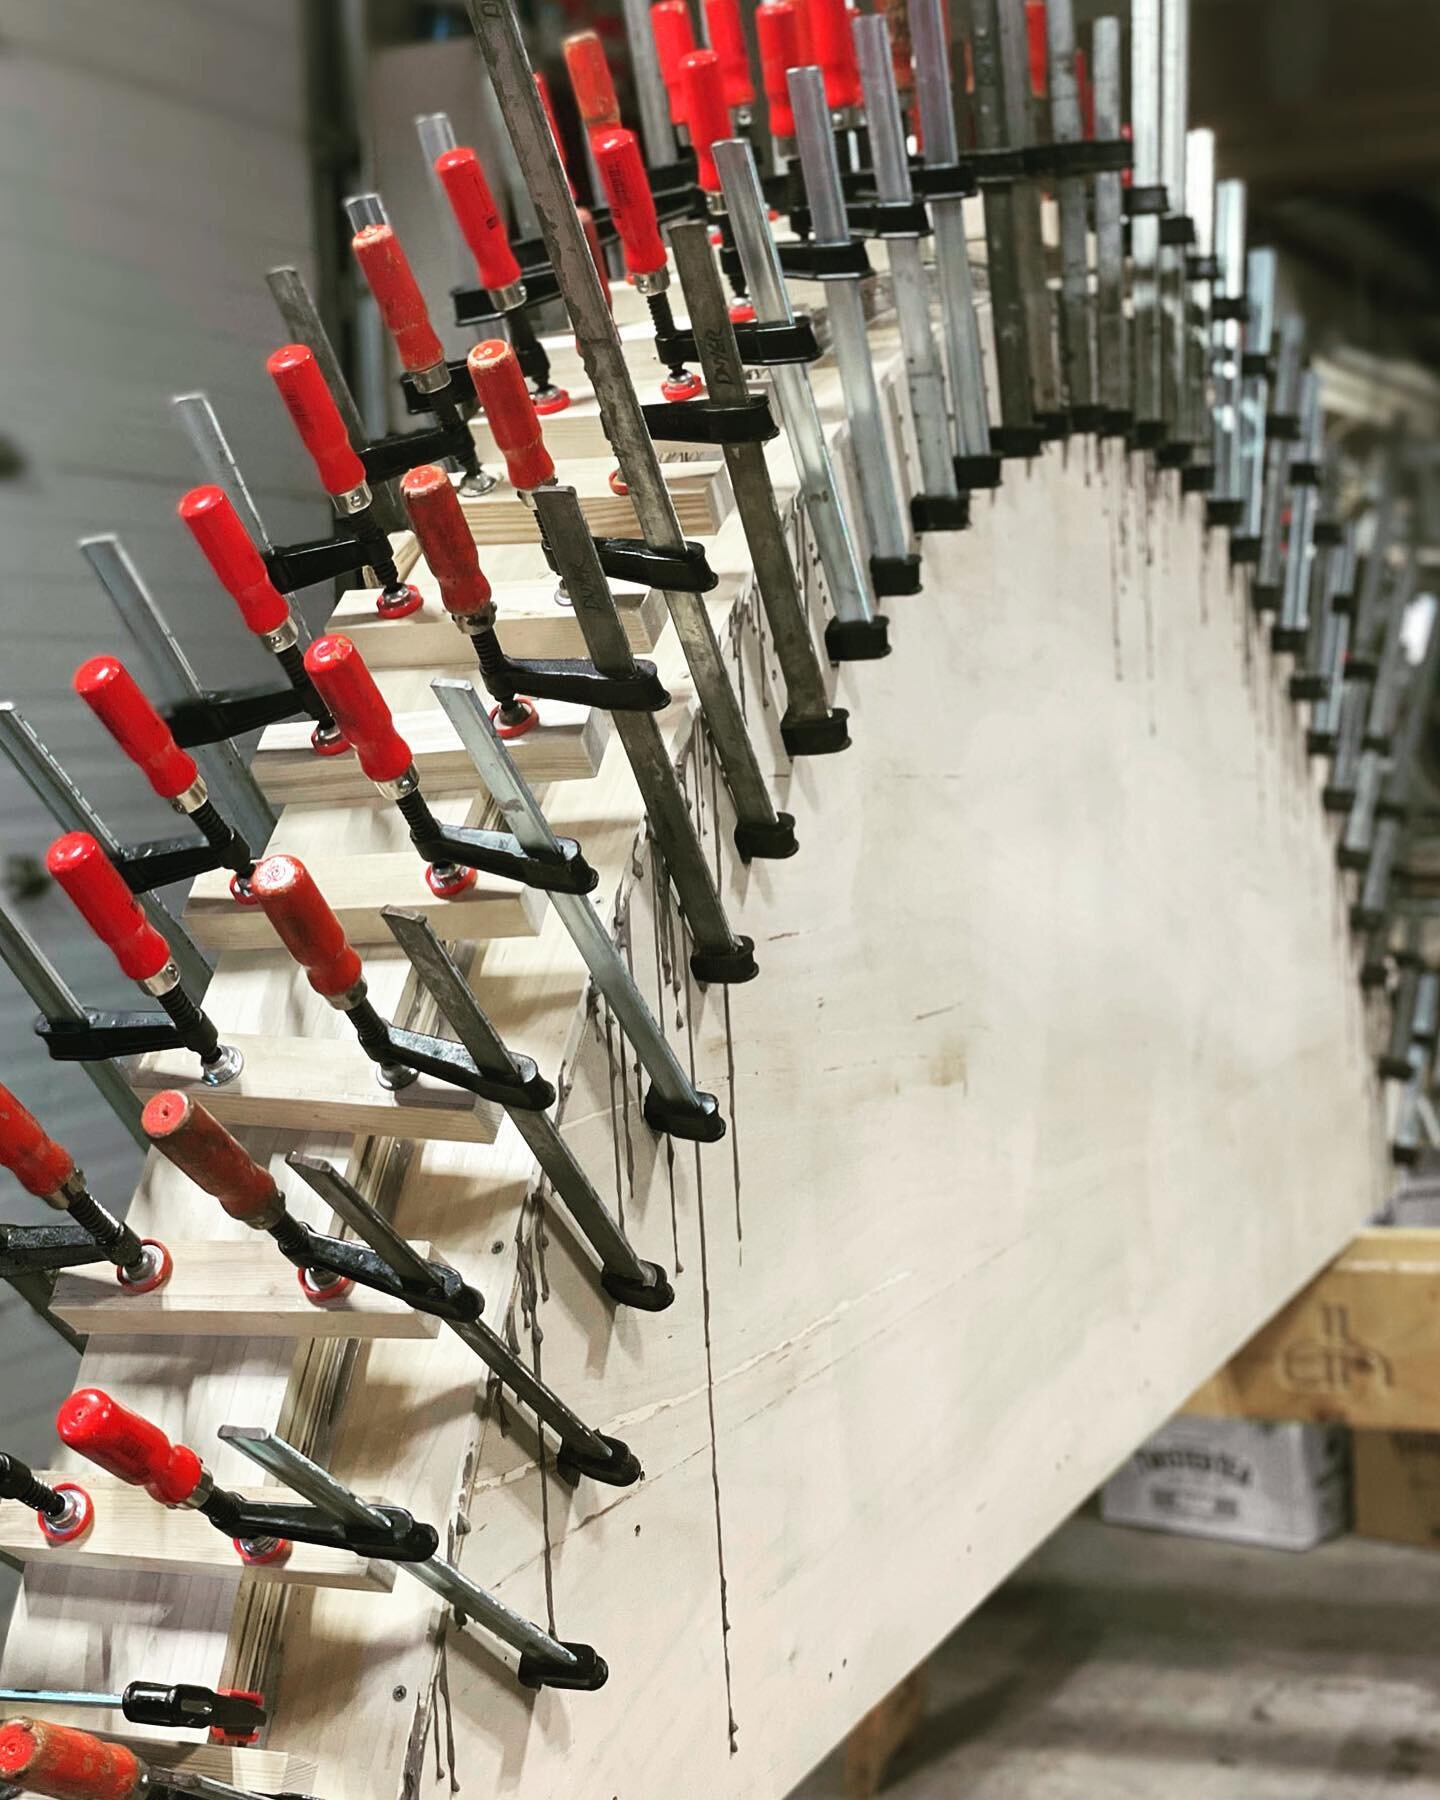 Too many clamps is almost enough on these tight radii. #radiusmillwork #quickmoreclamps #clamping #psi